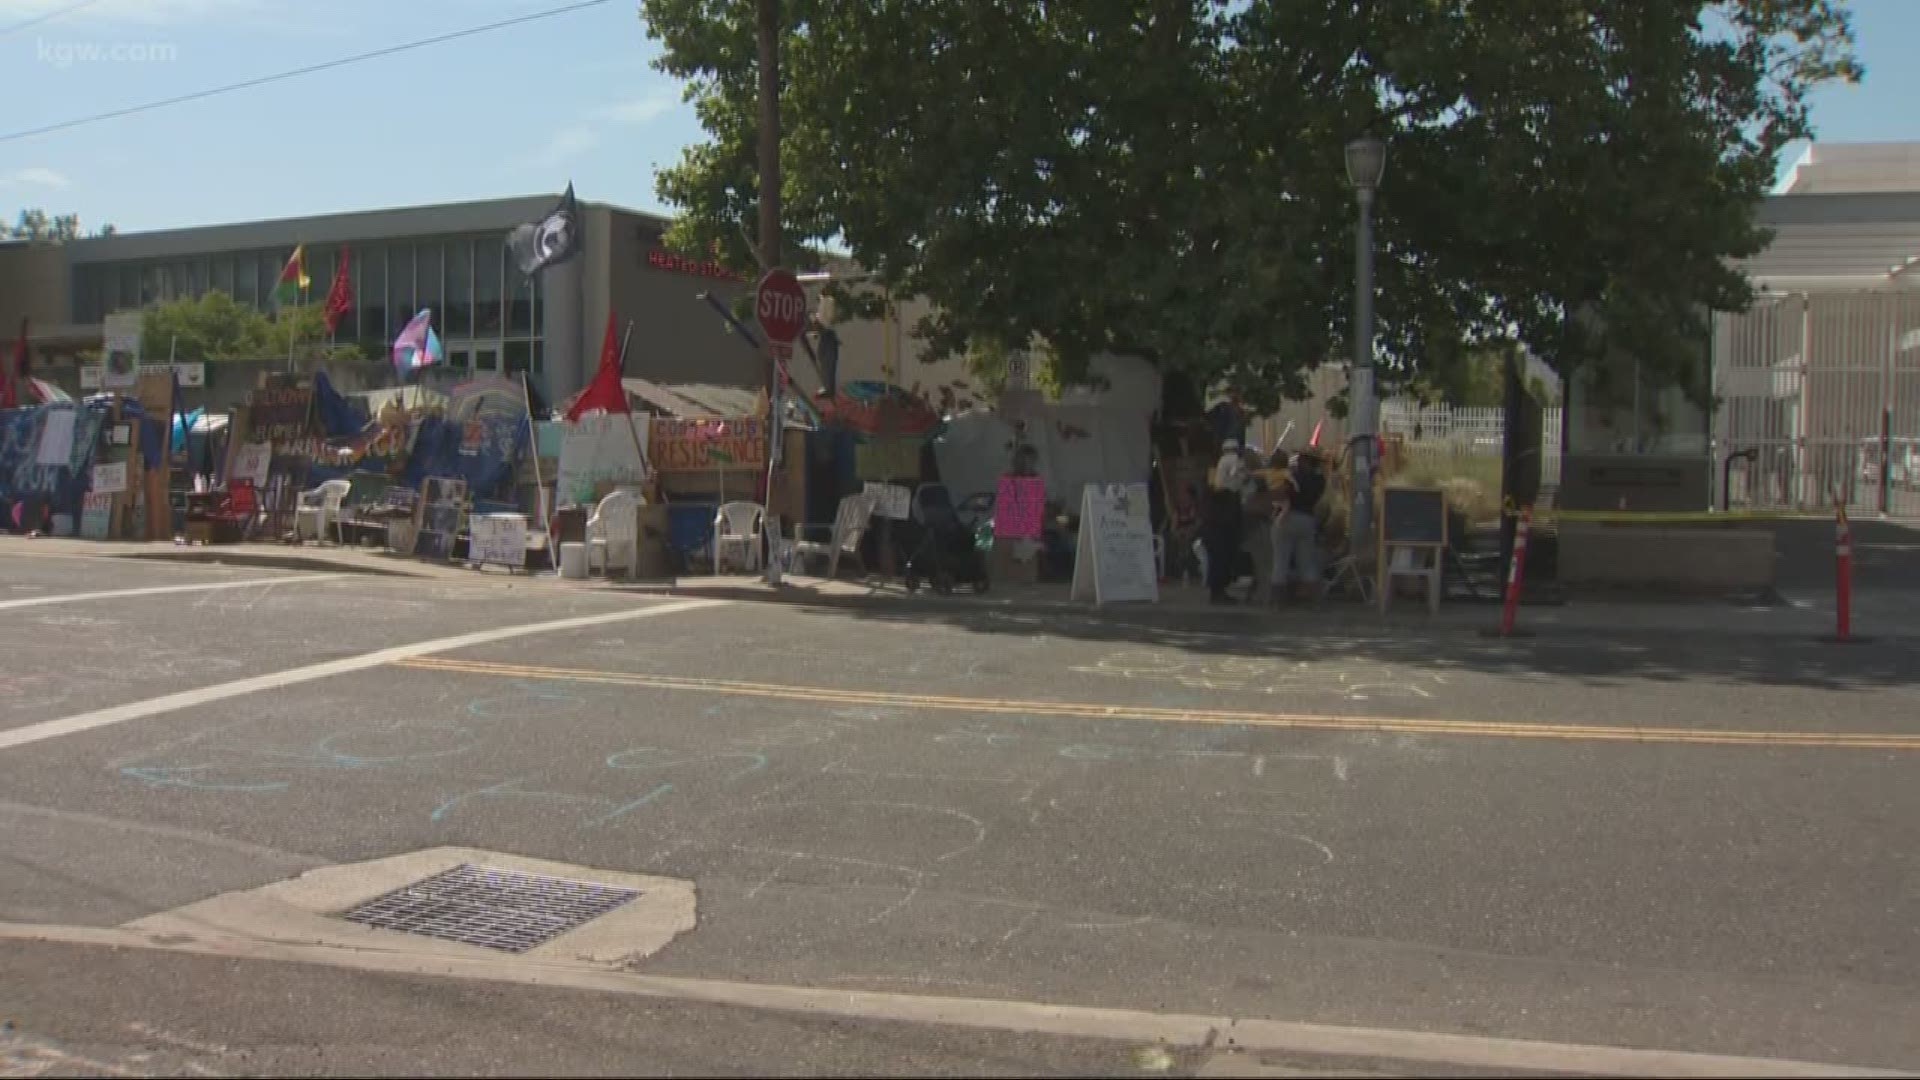 Neighbors and businesses are getting fed up with the Occupy ICE PDX camp.